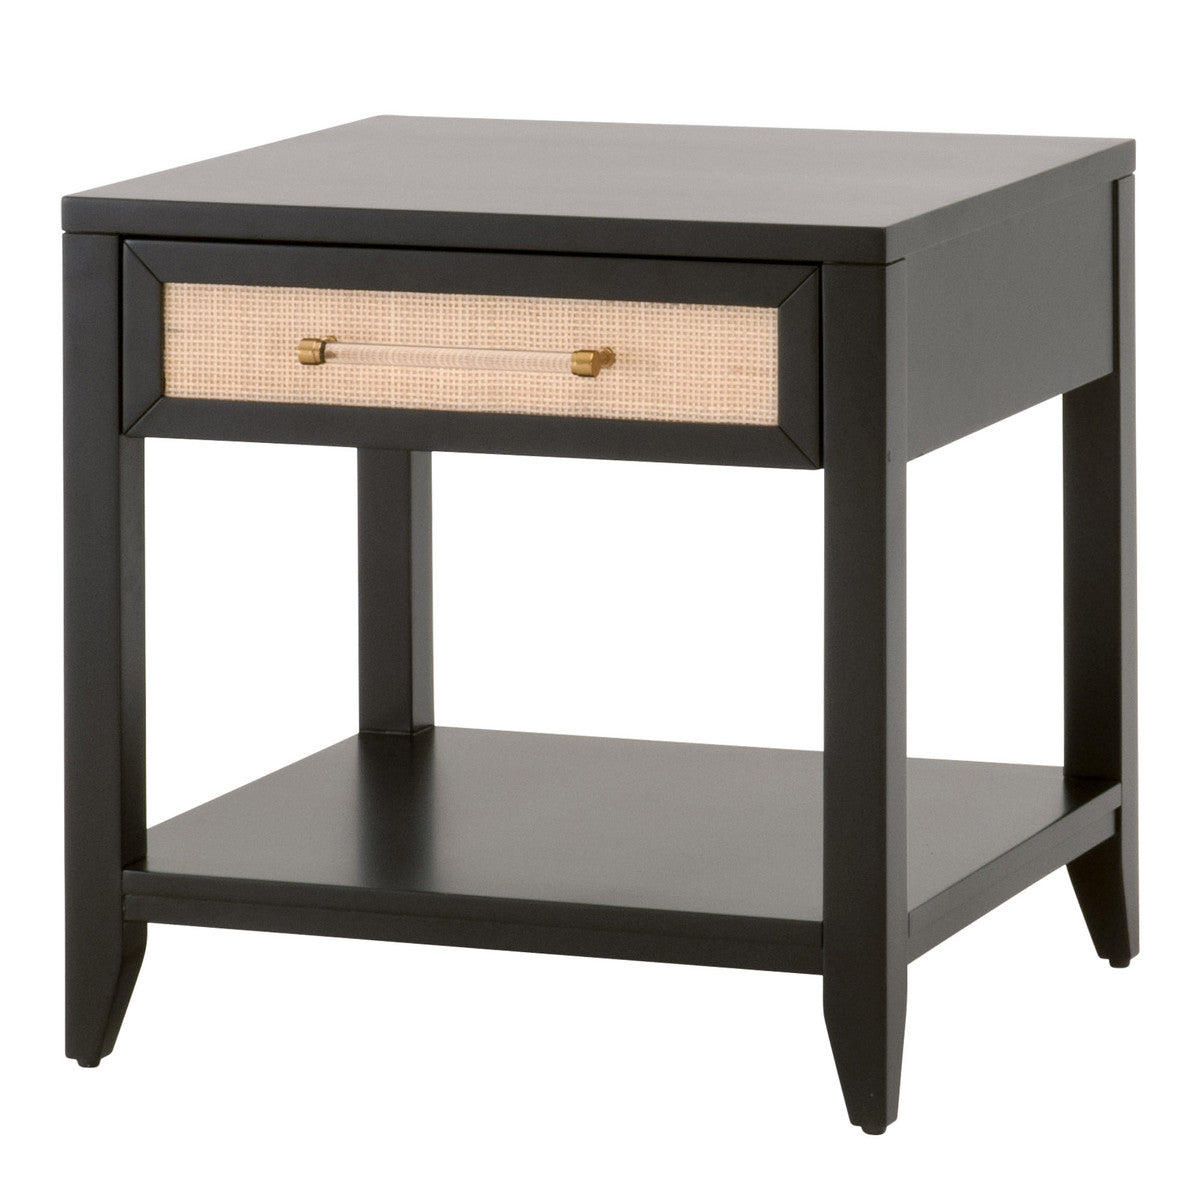 Essentials For Living Nightstands & Side Tables - Holland 1-Drawer Side Table Brushed Black Acacia, Natural Rattan